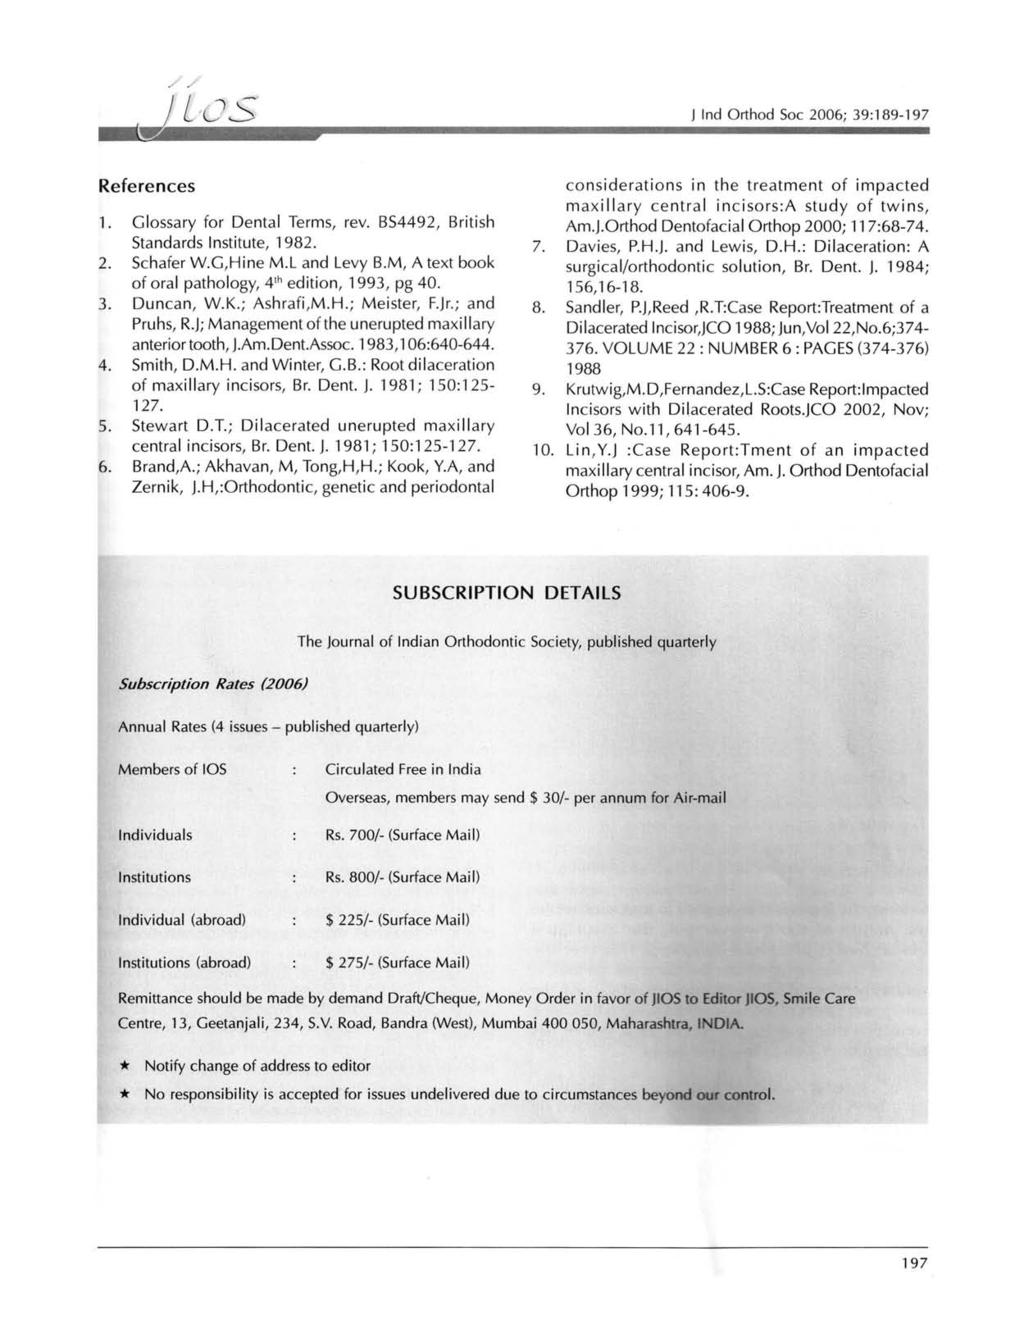 ~ J Ind Orthod Soc 2006; 39:189-197 References 1. Glossary for Dental Terms, rev. BS4492, British Standards Institute, 1982. 2. Schafer W.G,Hine M.L and Levy B.